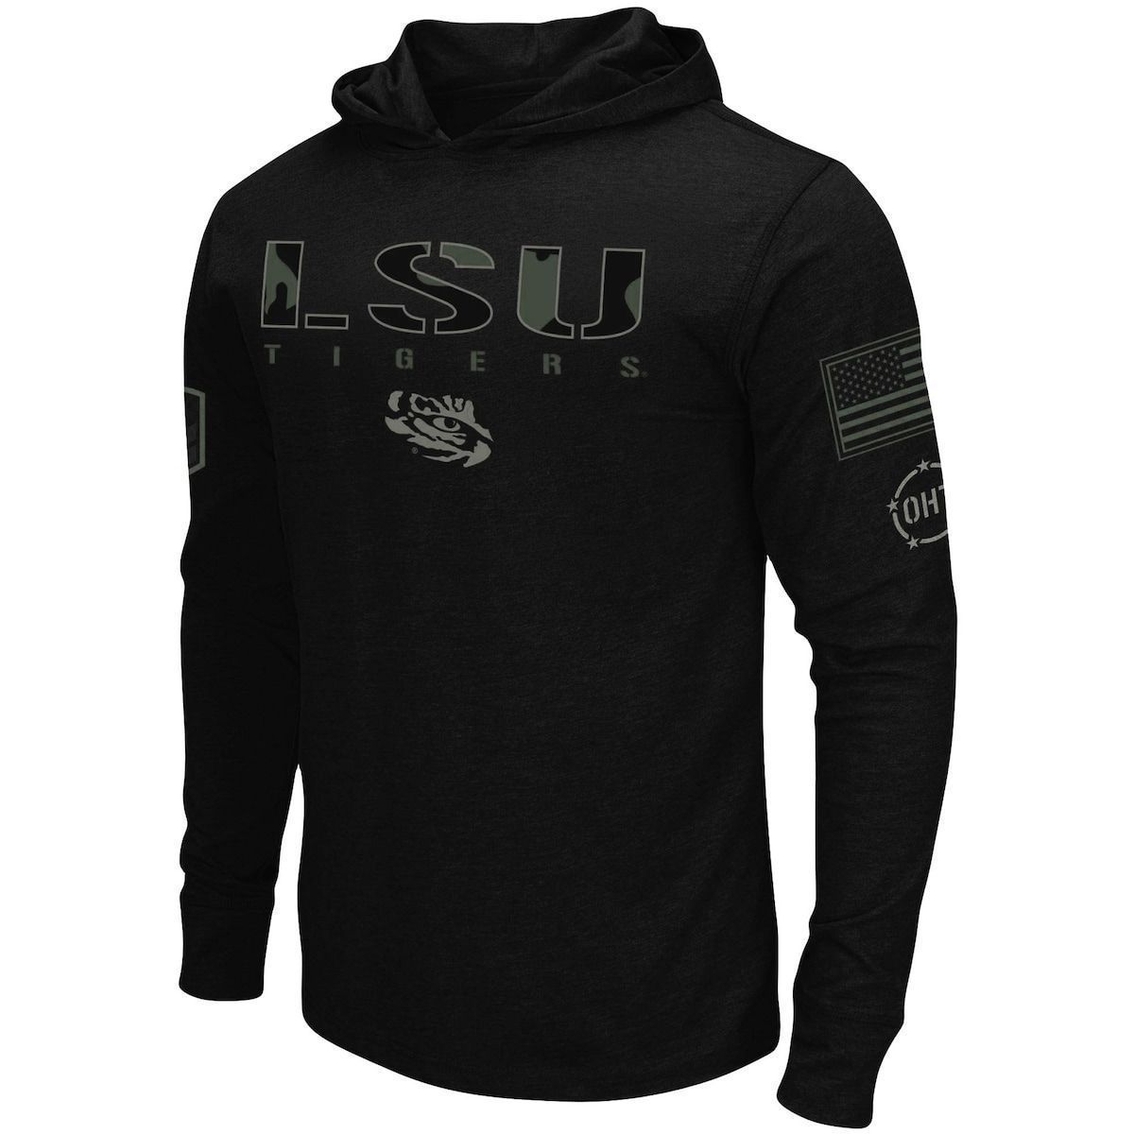 Colosseum Men's Black LSU Tigers OHT Military Appreciation Hoodie Long Sleeve T-Shirt - Image 3 of 4